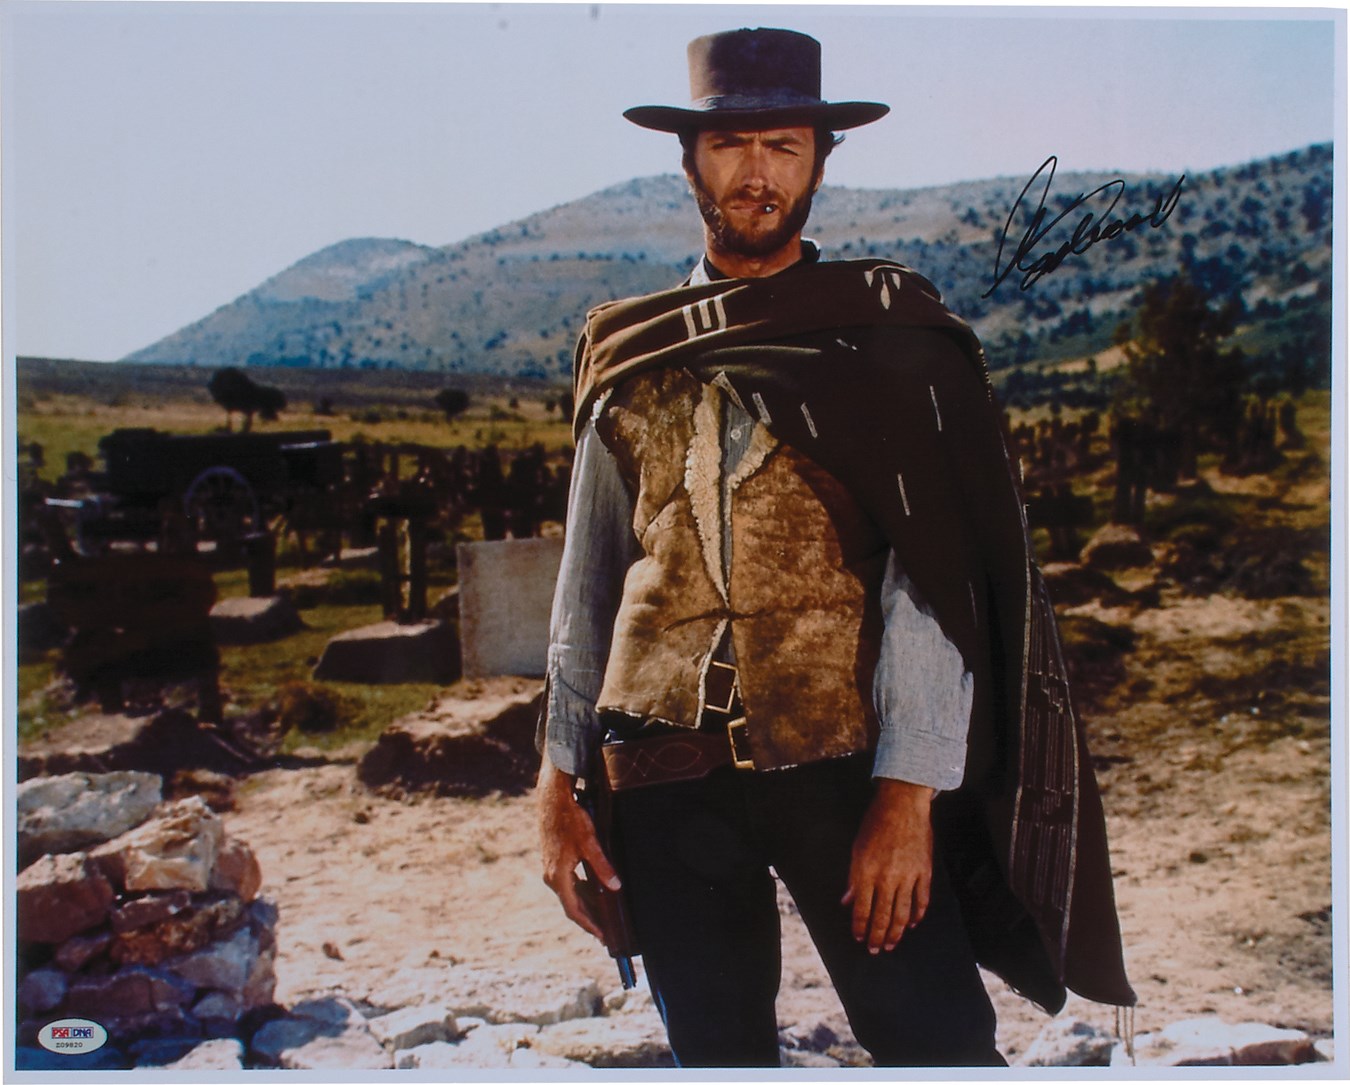 Pop Culture Autographs - Clint Eastwood 16x20" "The Good, The Bad and The Ugly" Signed Photograph (PSA/DNA)